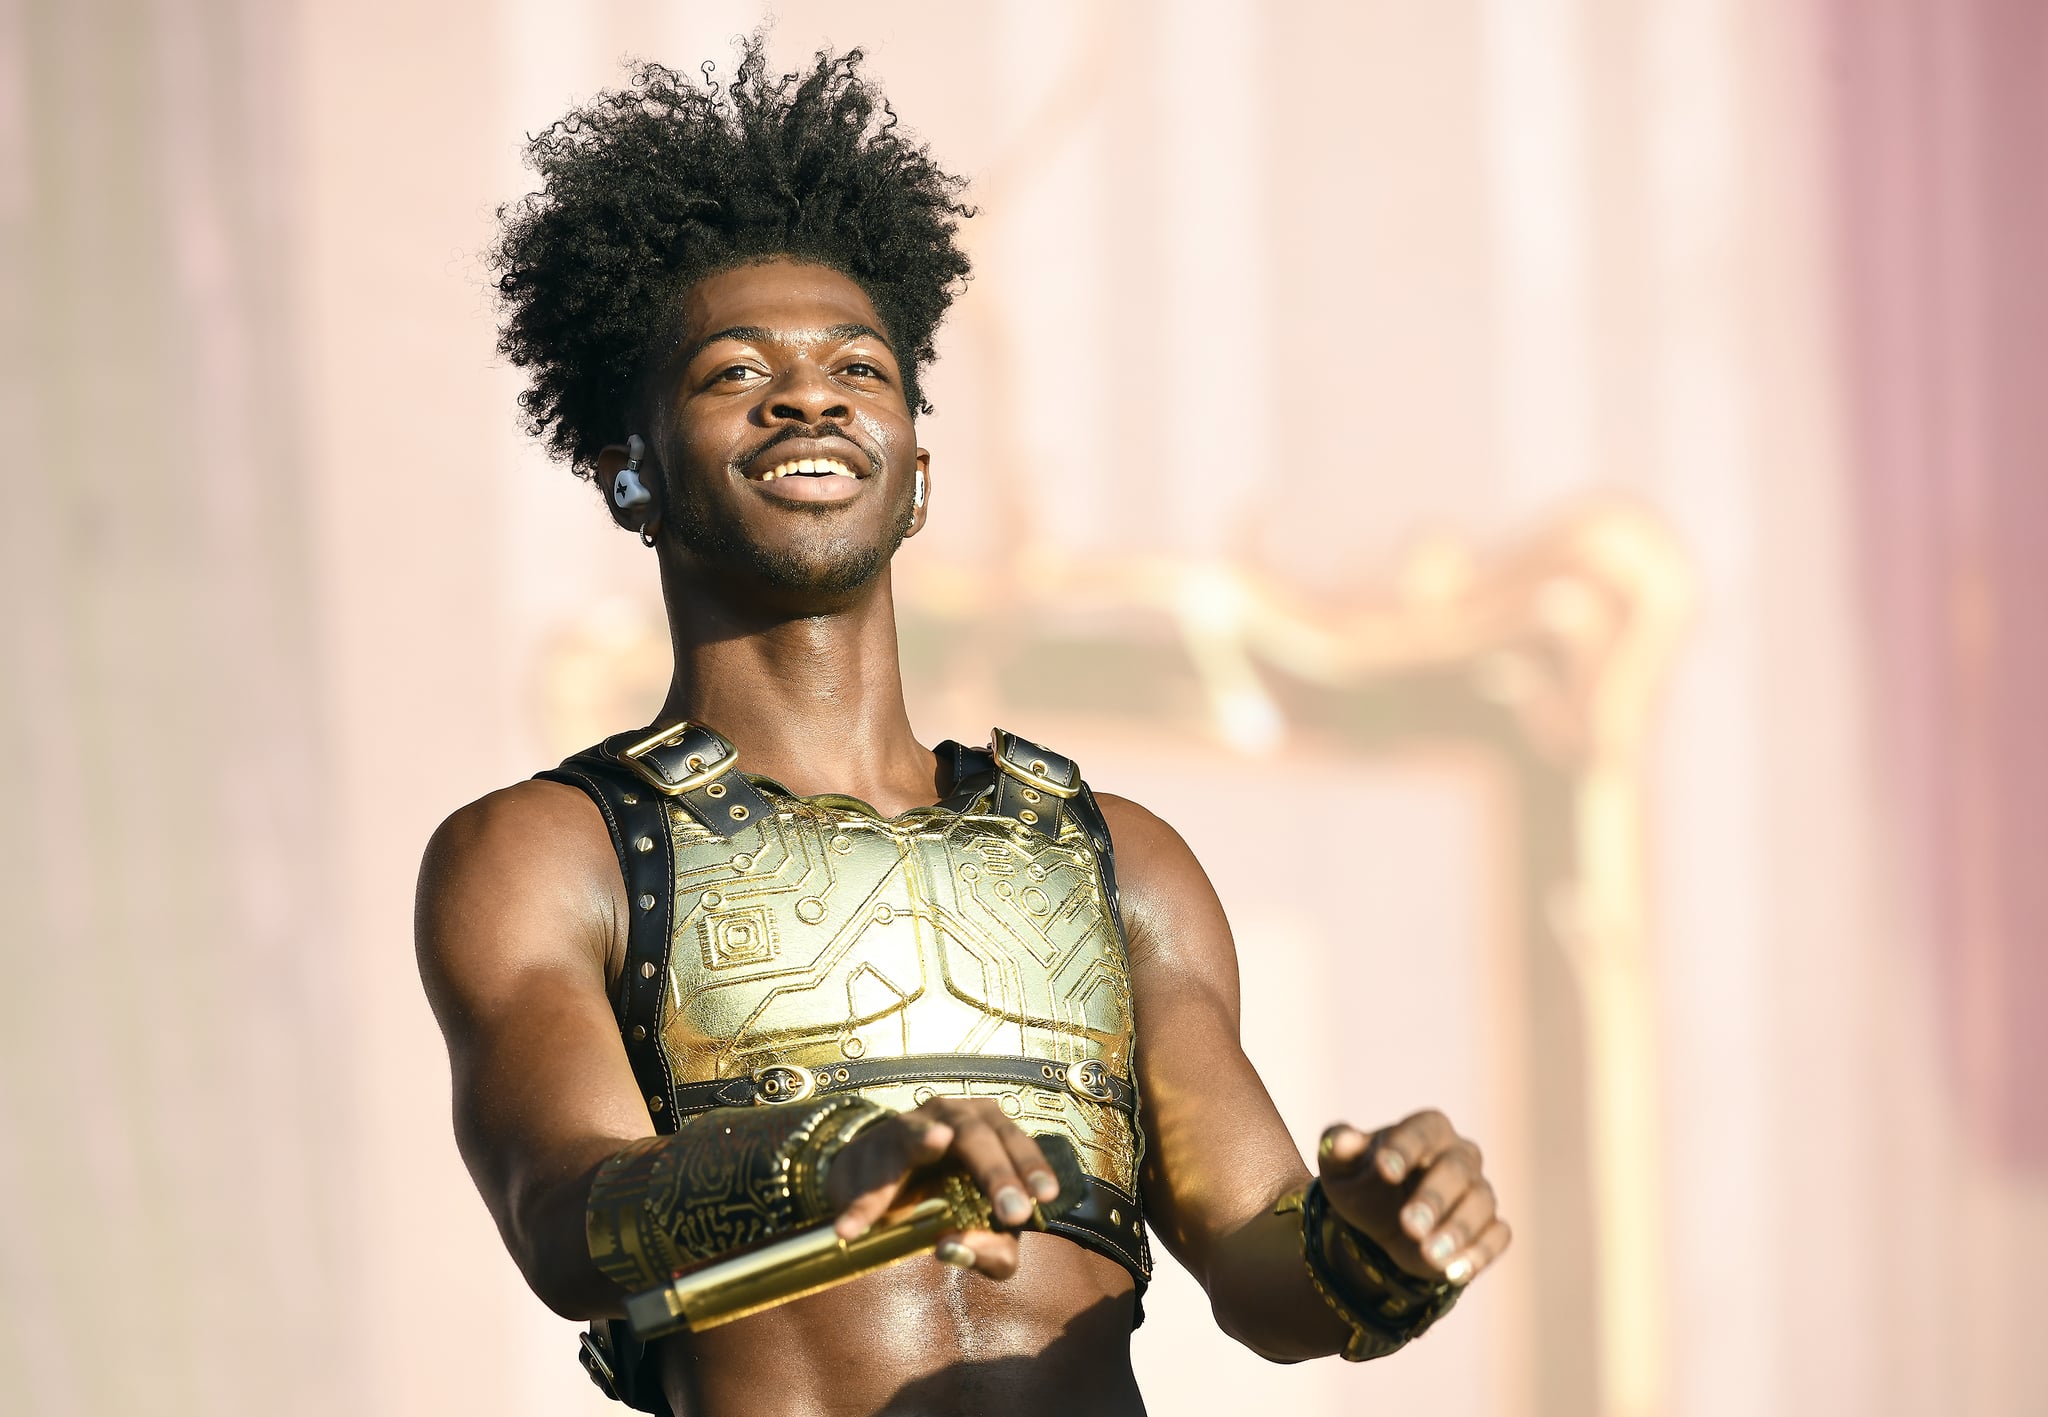 AUSTIN, TEXAS - OCTOBER 08: Lil Nas X performs during the ACL Music festival 2022 at Zilker Park on October 08, 2022 in Austin, Texas. (Photo by Tim Mosenfelder/FilmMagic)